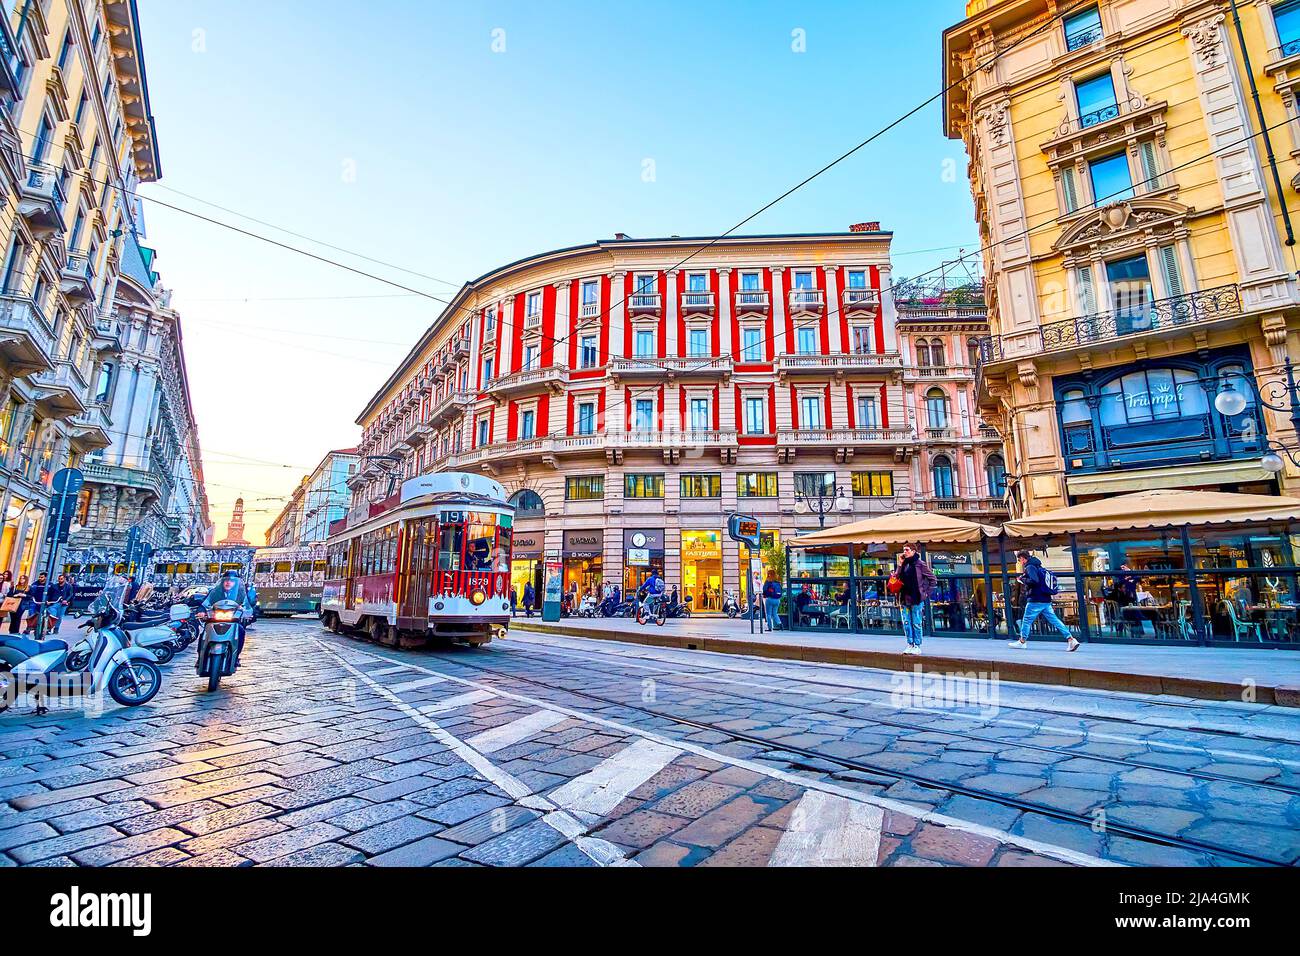 MILAN, ITALY - APRIL 5, 2022: The old vintage tram rides along Via Dante street in central district, on April 5 in Milan, Italy Stock Photo